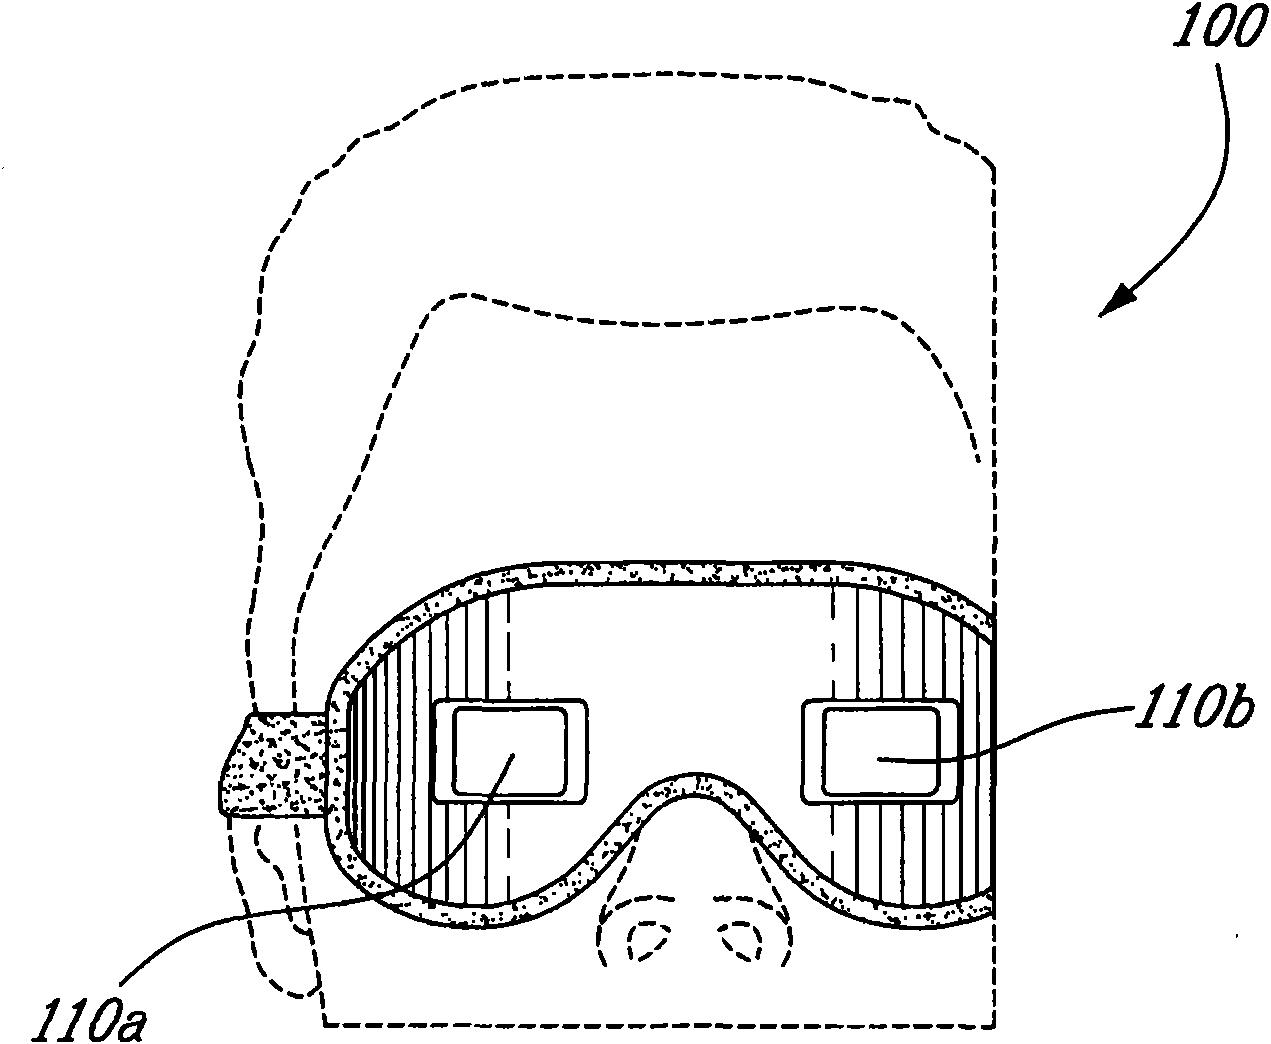 Head-mounted display apparatus for profiling system